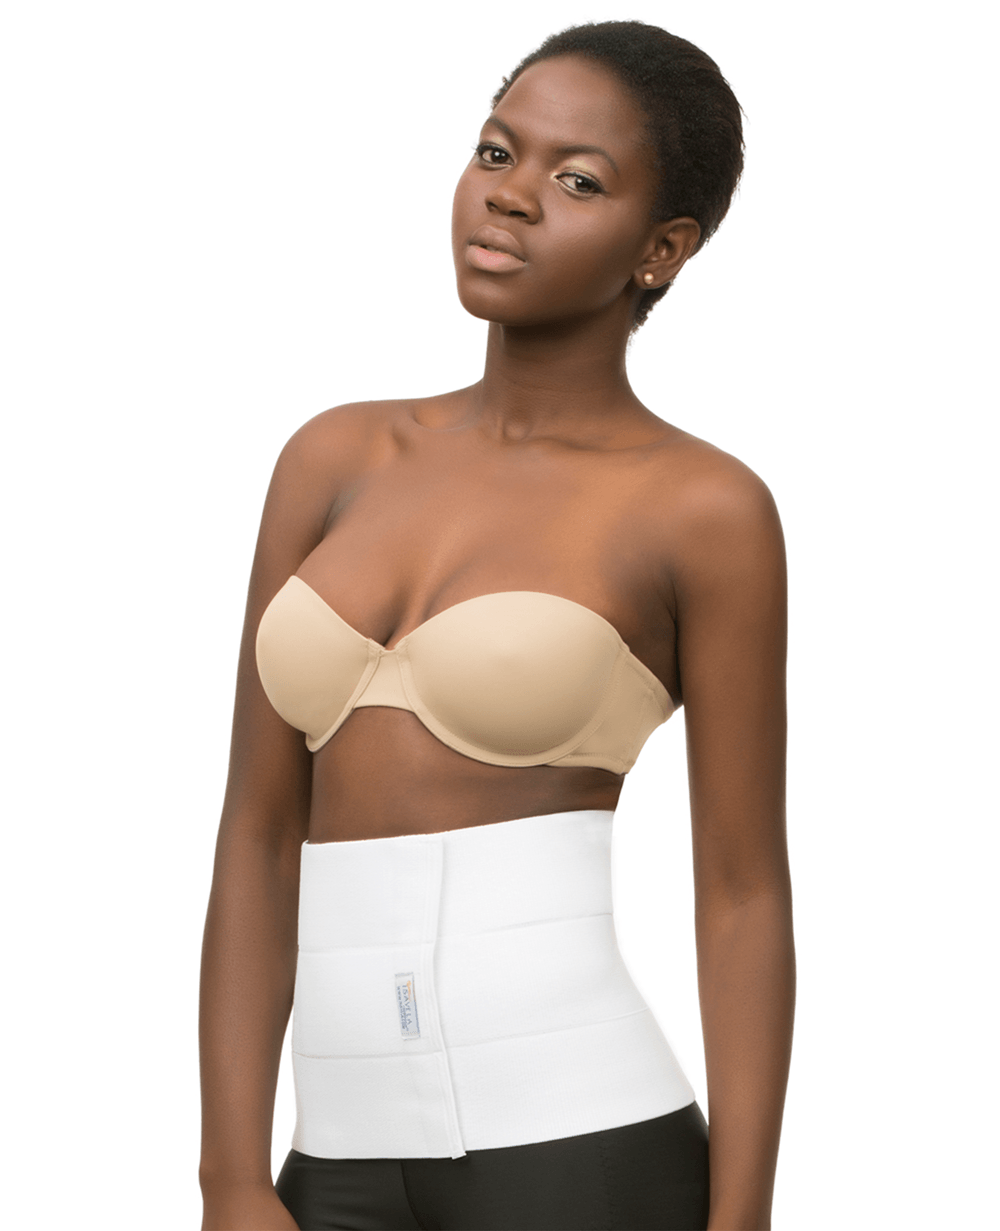 Isavela Compression Garments - Encourage Saggy Skin to Shrink: Isavela  Garments minimize and smooths saggy skin with proper compression. It is  natural for skin to sag after fat is removed, and without